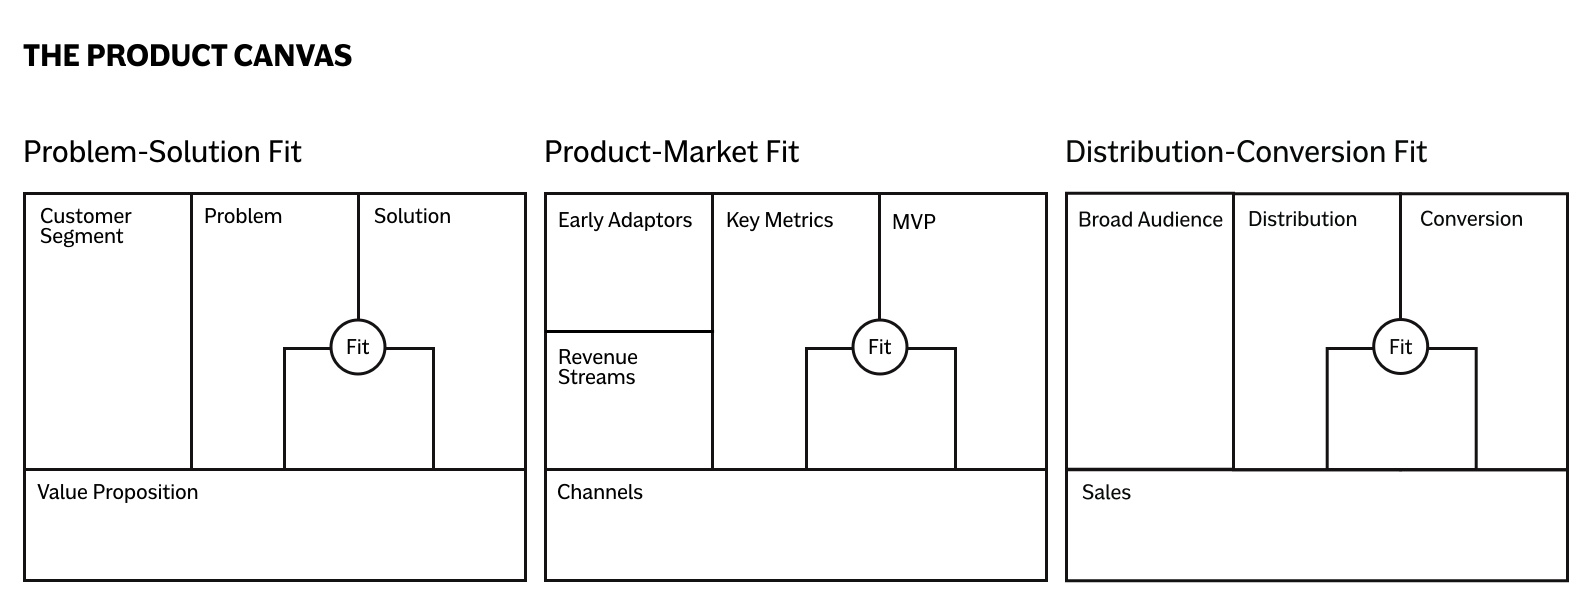 Preview: The Product Canvas Sketch-File